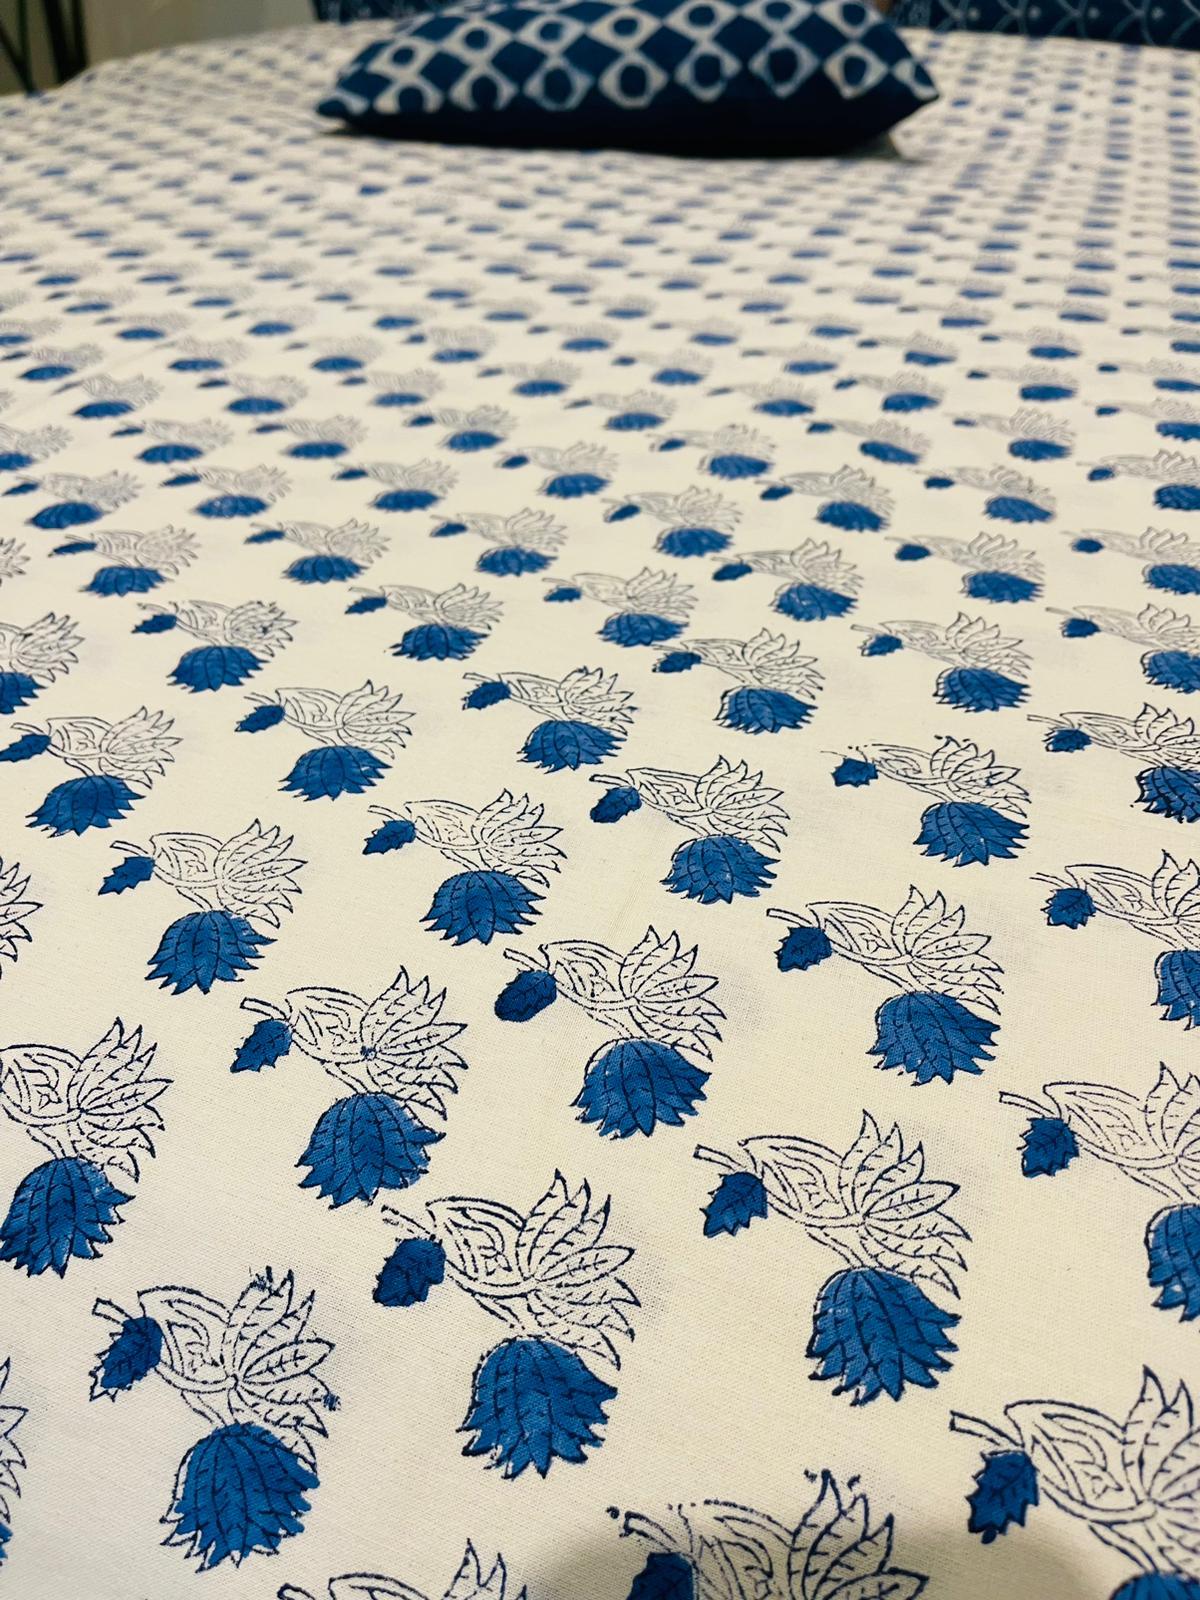 Blue Floral Cotton Quilt cover Hand Block print - Rooii by Tuvisha